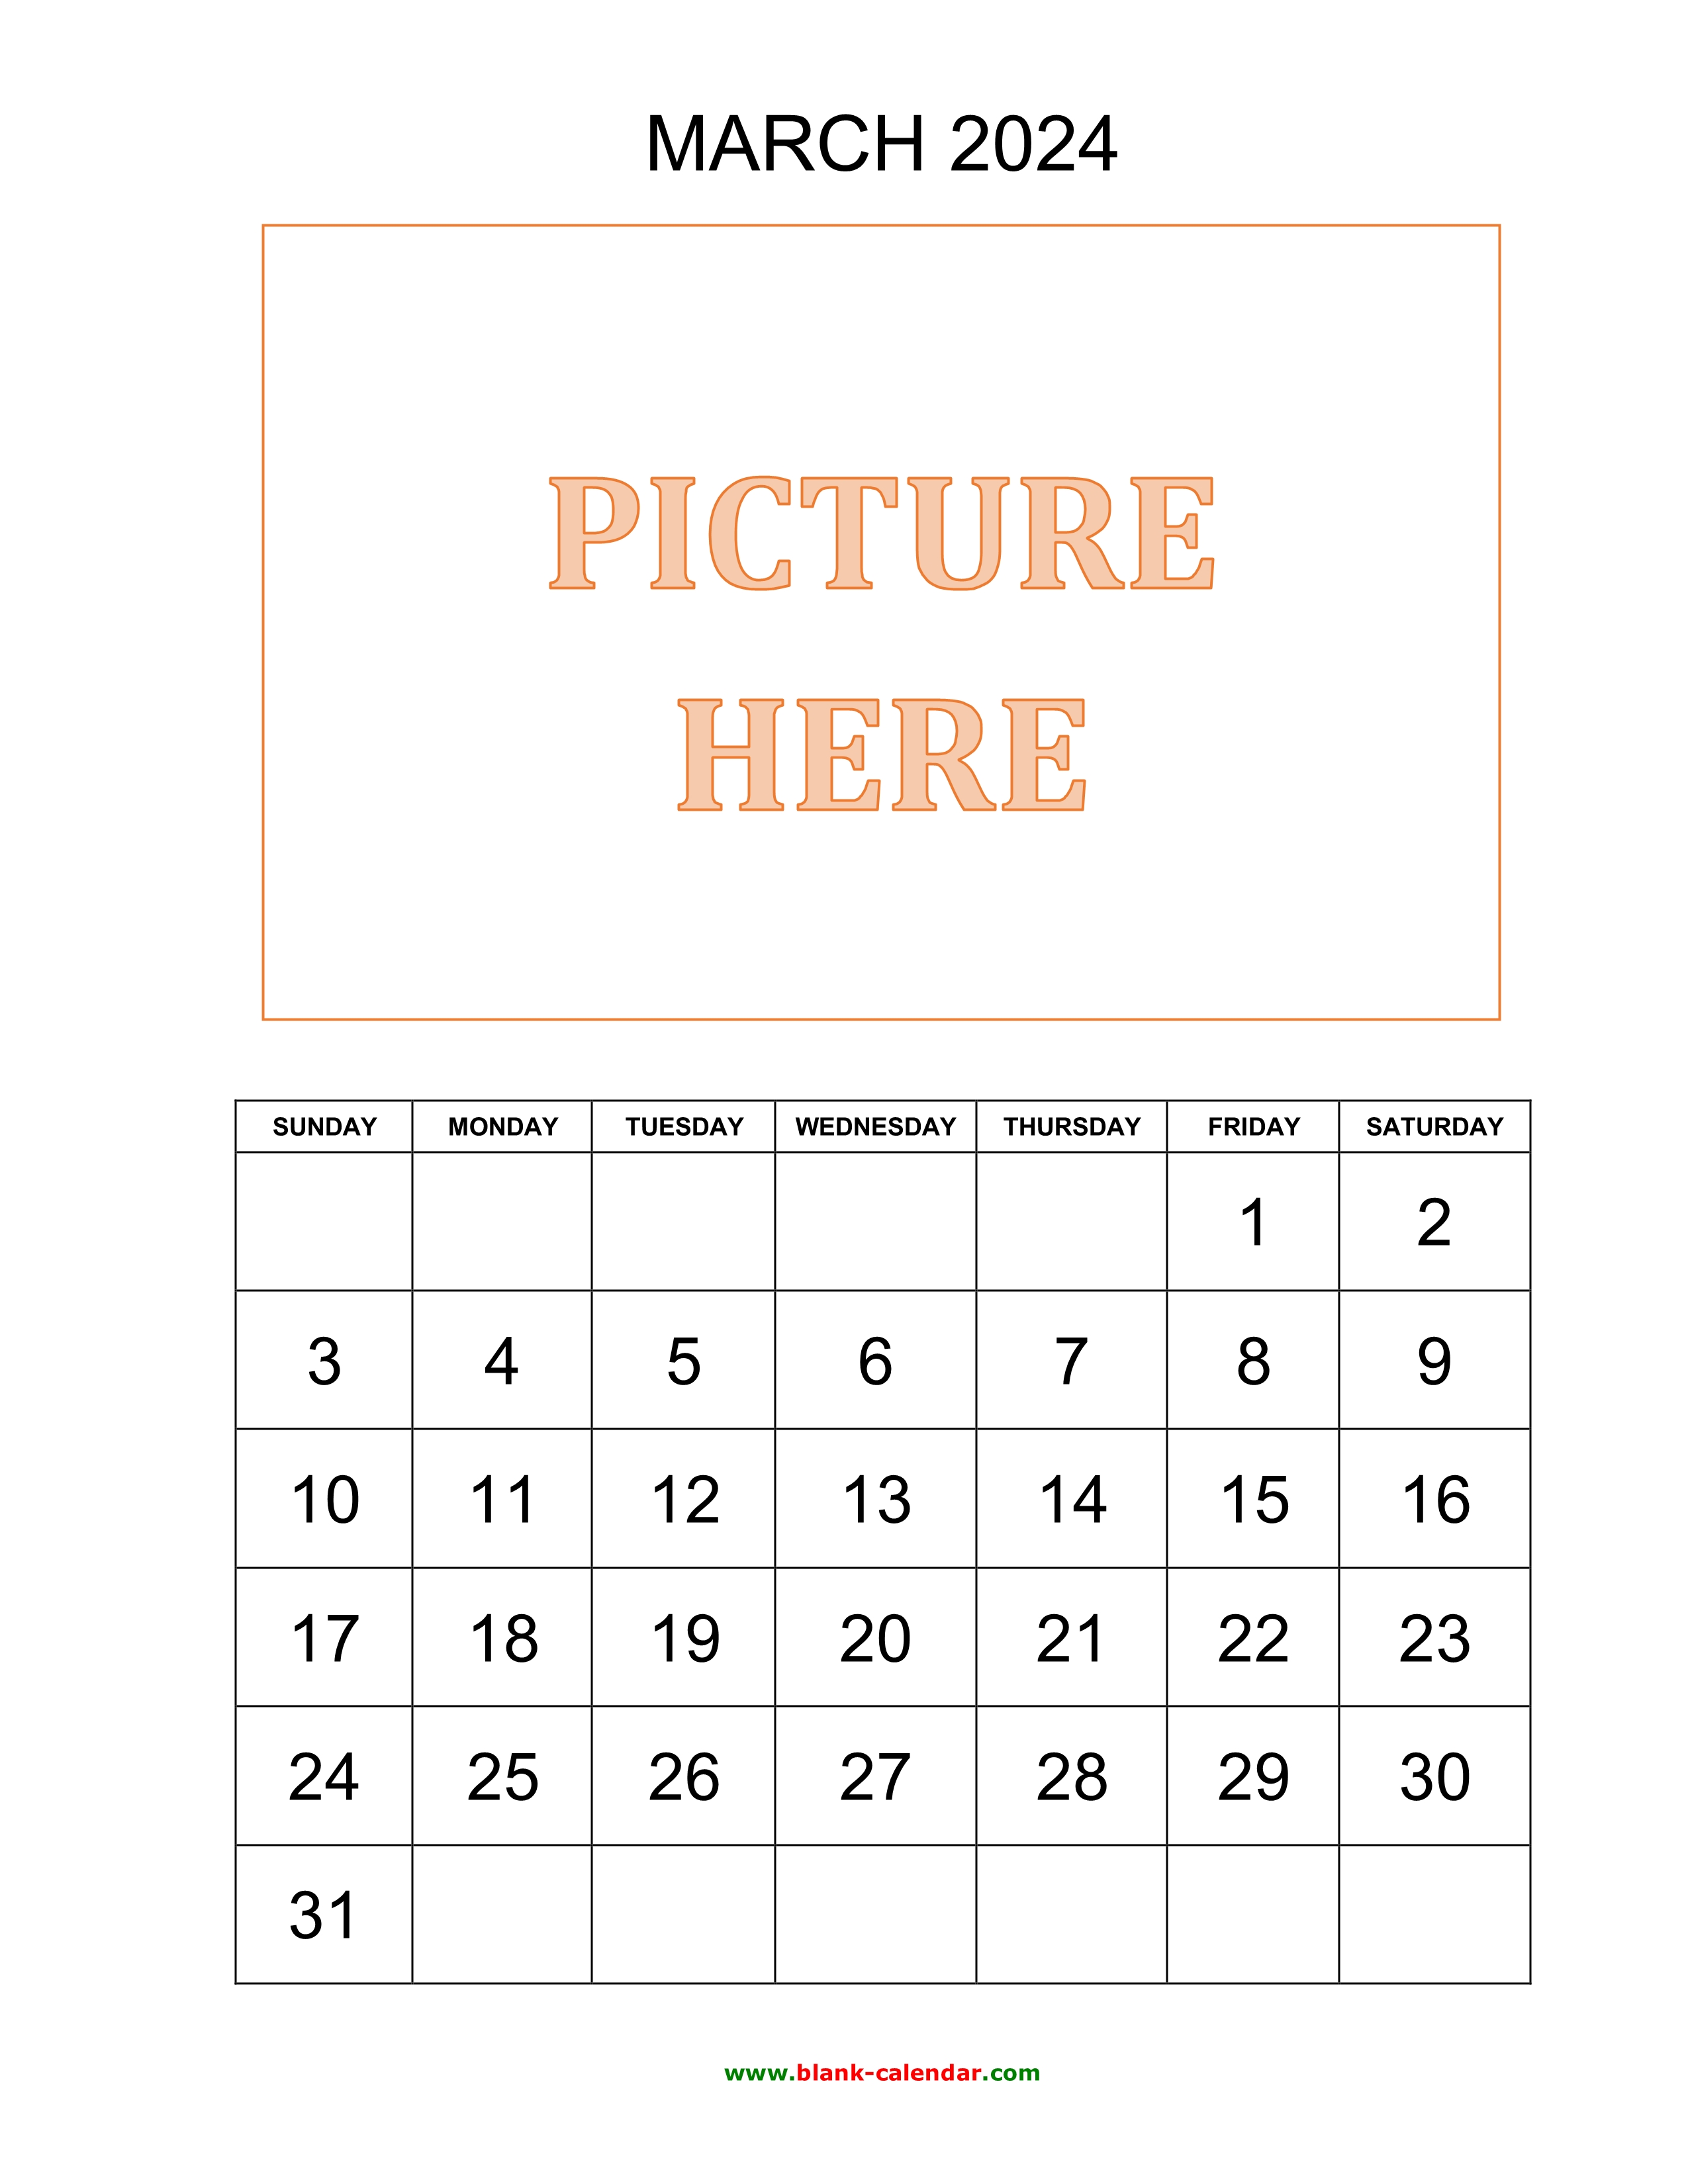 Free Download Printable March 2024 Calendar, pictures can be placed at